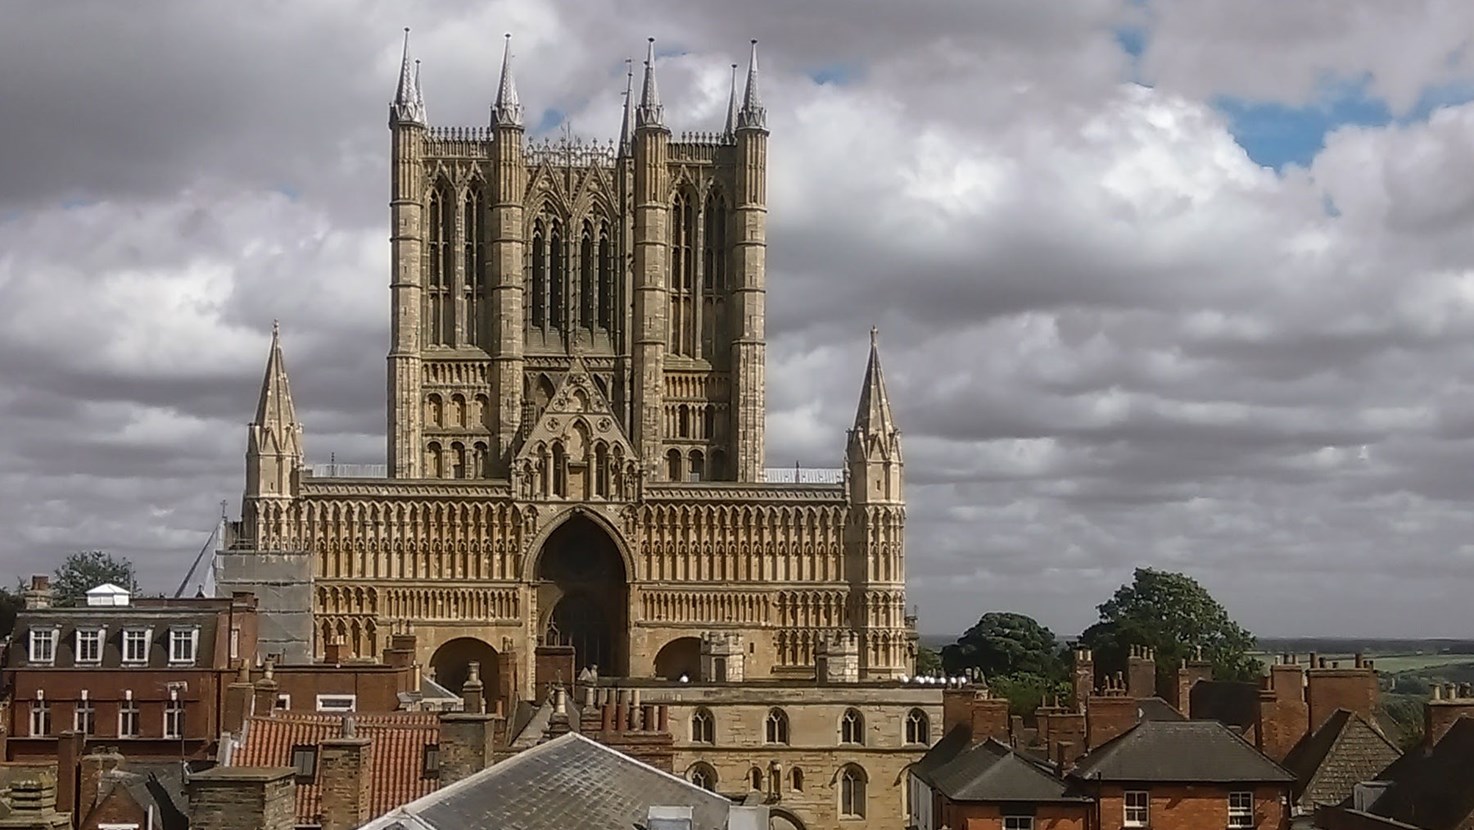 View all the events and meetings that PCC Marc Jones attended or hosted at Lincoln Cathedral in 2022